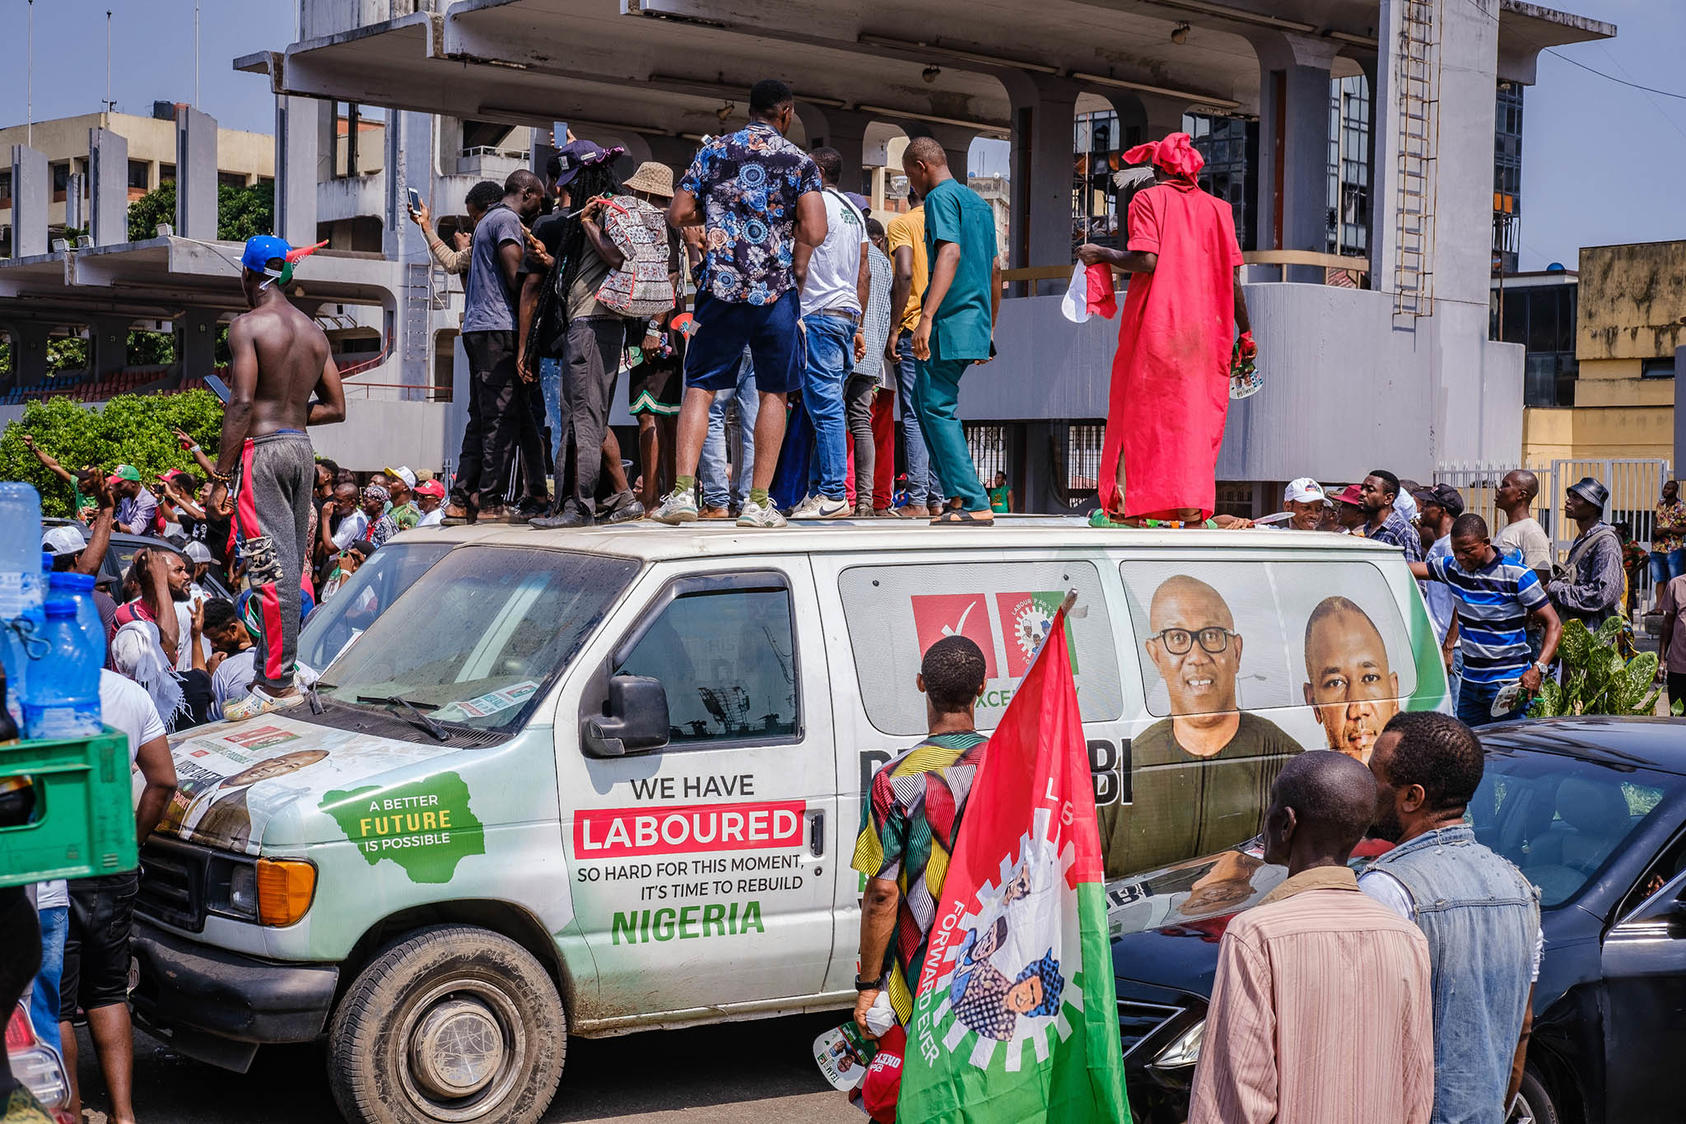 Young Nigerians stand on a campaign van to watch a rally for the third-party candidate in February’s presidential election. Nigerian youth, a majority of the population, are fueling demands for a more responsive democracy. (Taiwo Aina/The New York Times)